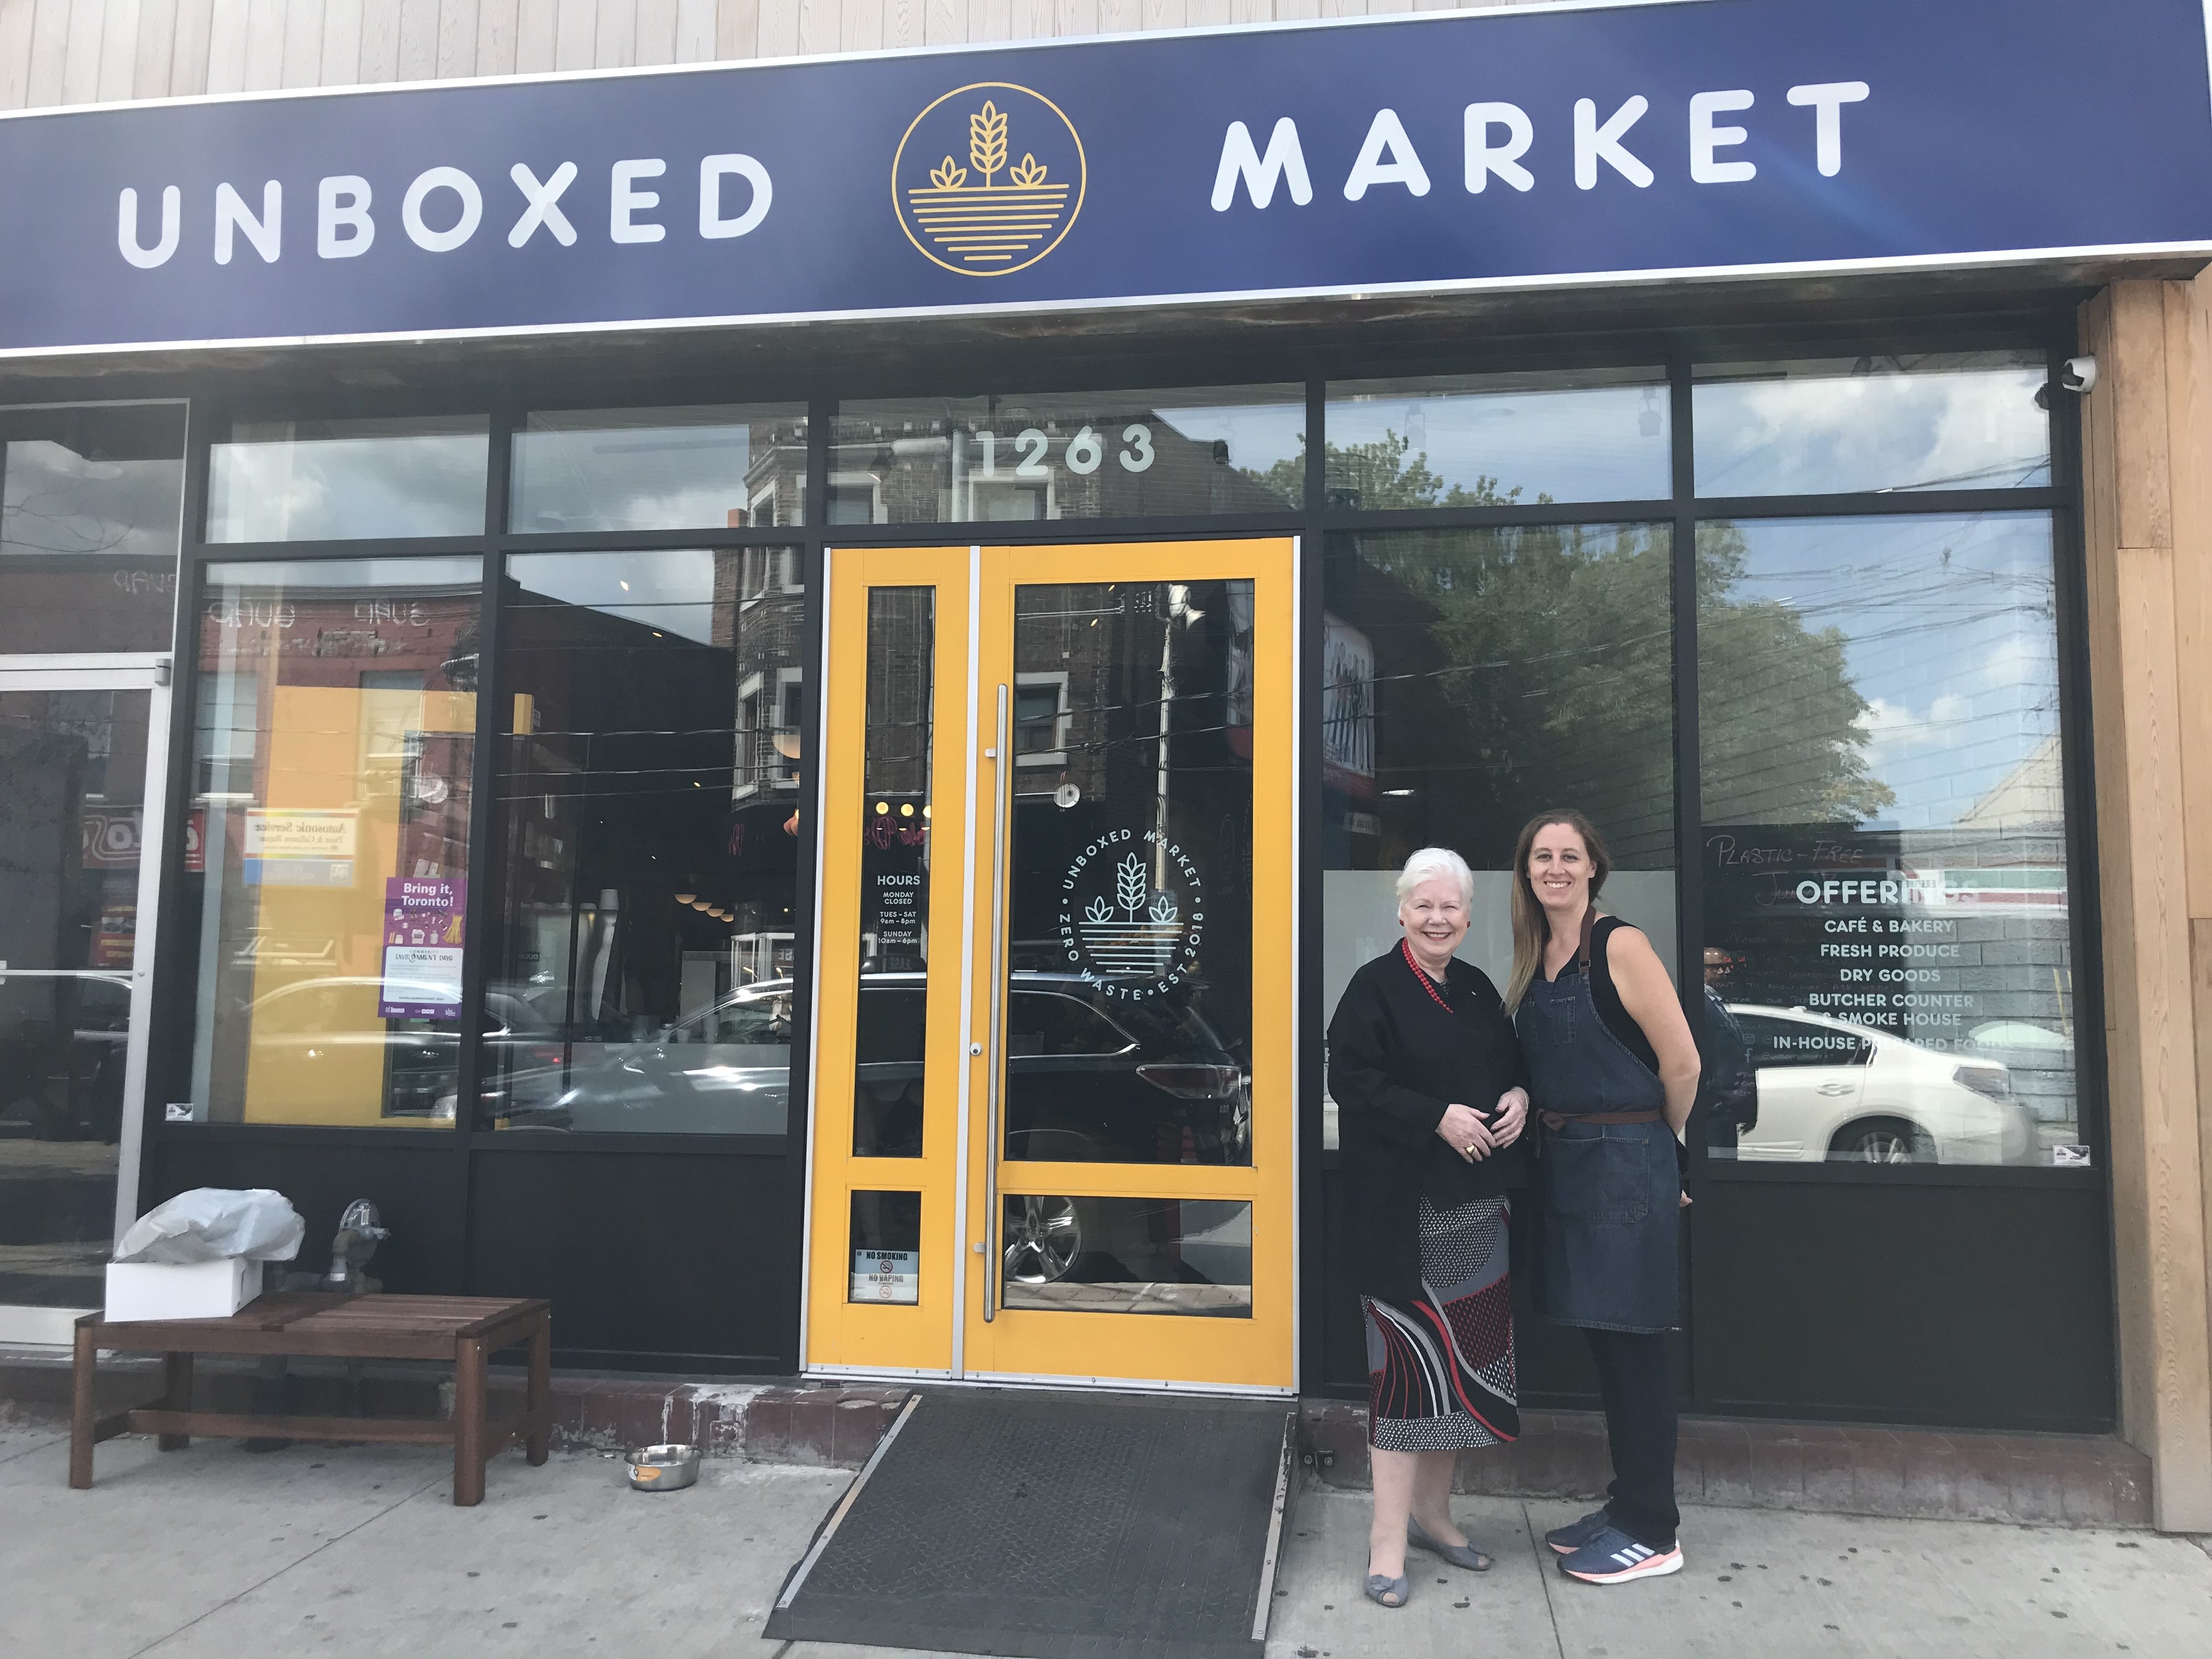 The Lieutenant Governor stands in front of the unboxed Market sign with the co-owner Michelle Genttner